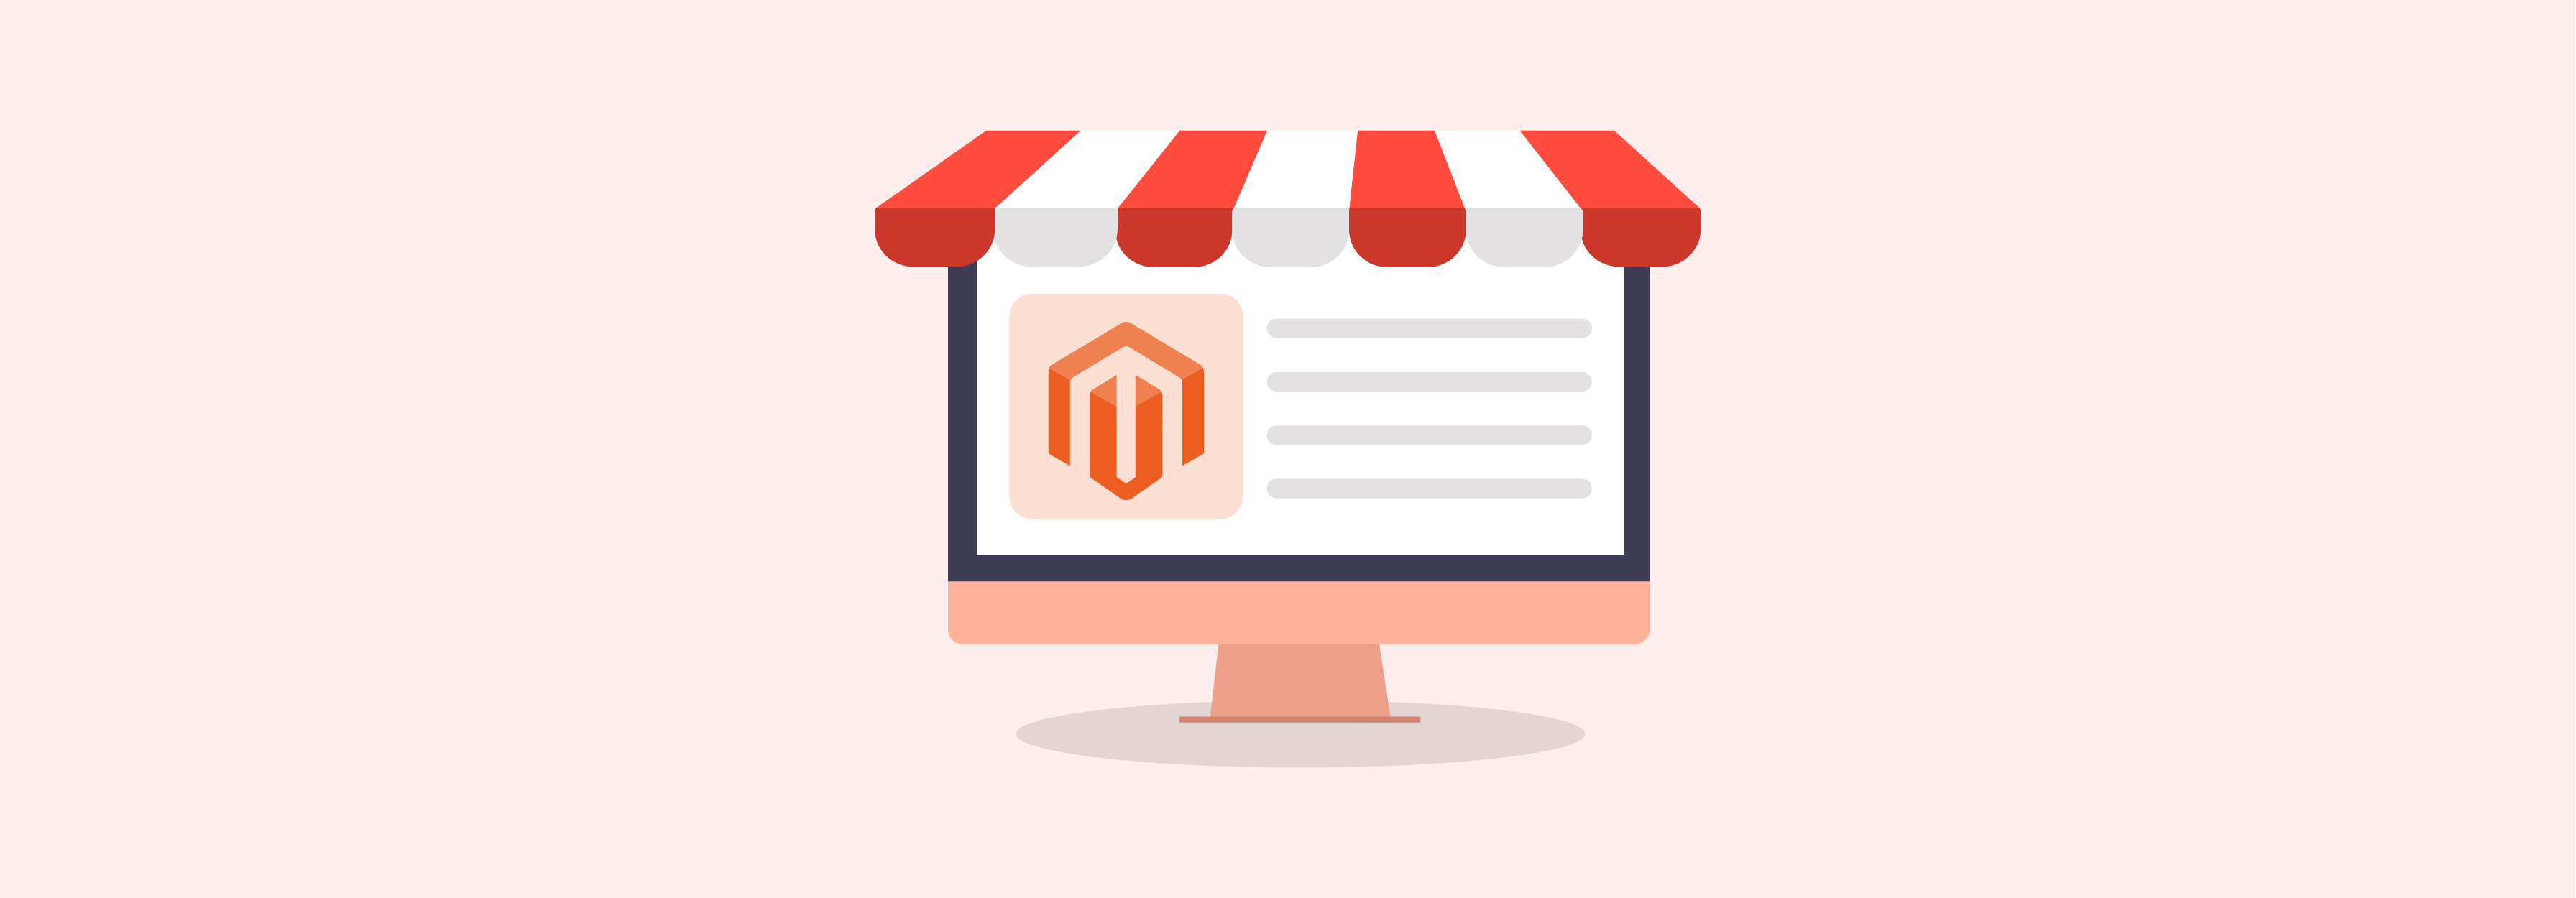 Overview of Magento Ecommerce as a flexible open-source platform